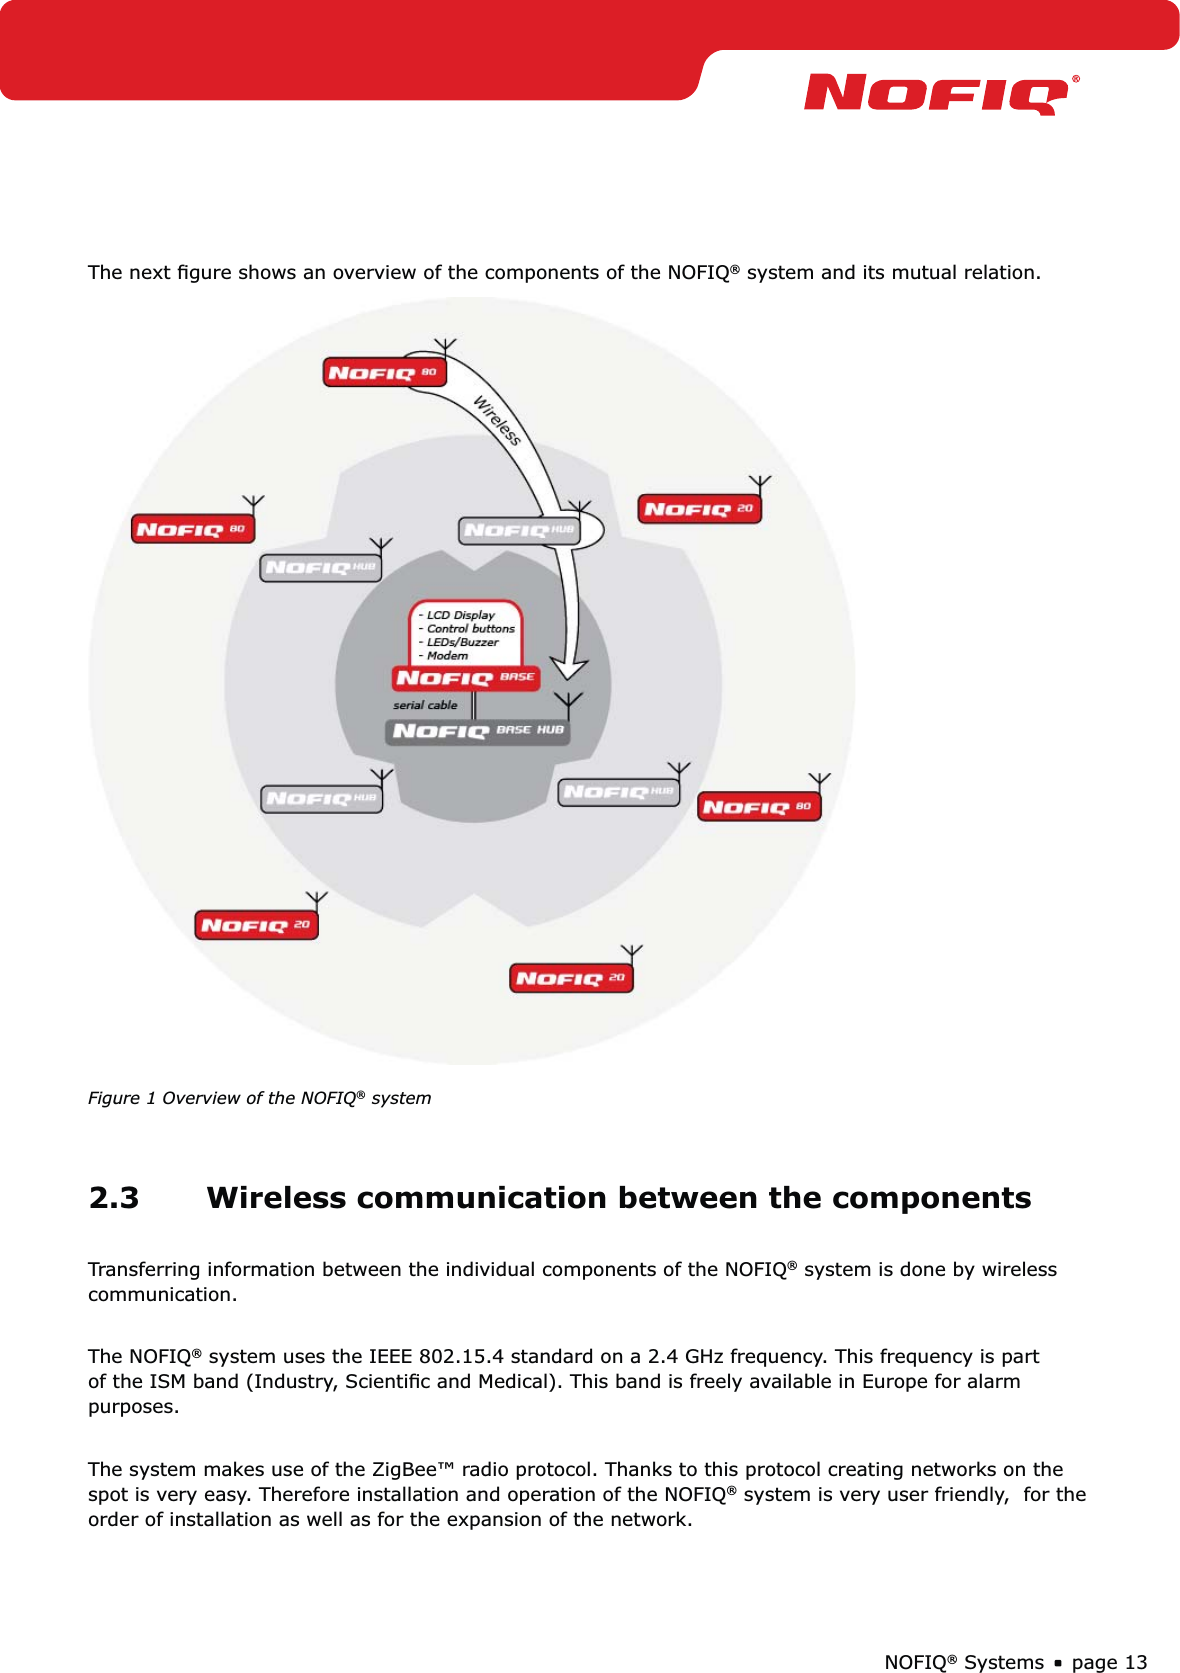 page 13NOFIQ® SystemsThe next ﬁgure shows an overview of the components of the NOFIQ® system and its mutual relation. Figure 1 Overview of the NOFIQ® system2.3  Wireless communication between the componentsTransferring information between the individual components of the NOFIQ® system is done by wireless communication.  The NOFIQ® system uses the IEEE 802.15.4 standard on a 2.4 GHz frequency. This frequency is part of the ISM band (Industry, Scientiﬁc and Medical). This band is freely available in Europe for alarm purposes.The system makes use of the ZigBee™ radio protocol. Thanks to this protocol creating networks on the spot is very easy. Therefore installation and operation of the NOFIQ® system is very user friendly,  for the order of installation as well as for the expansion of the network.